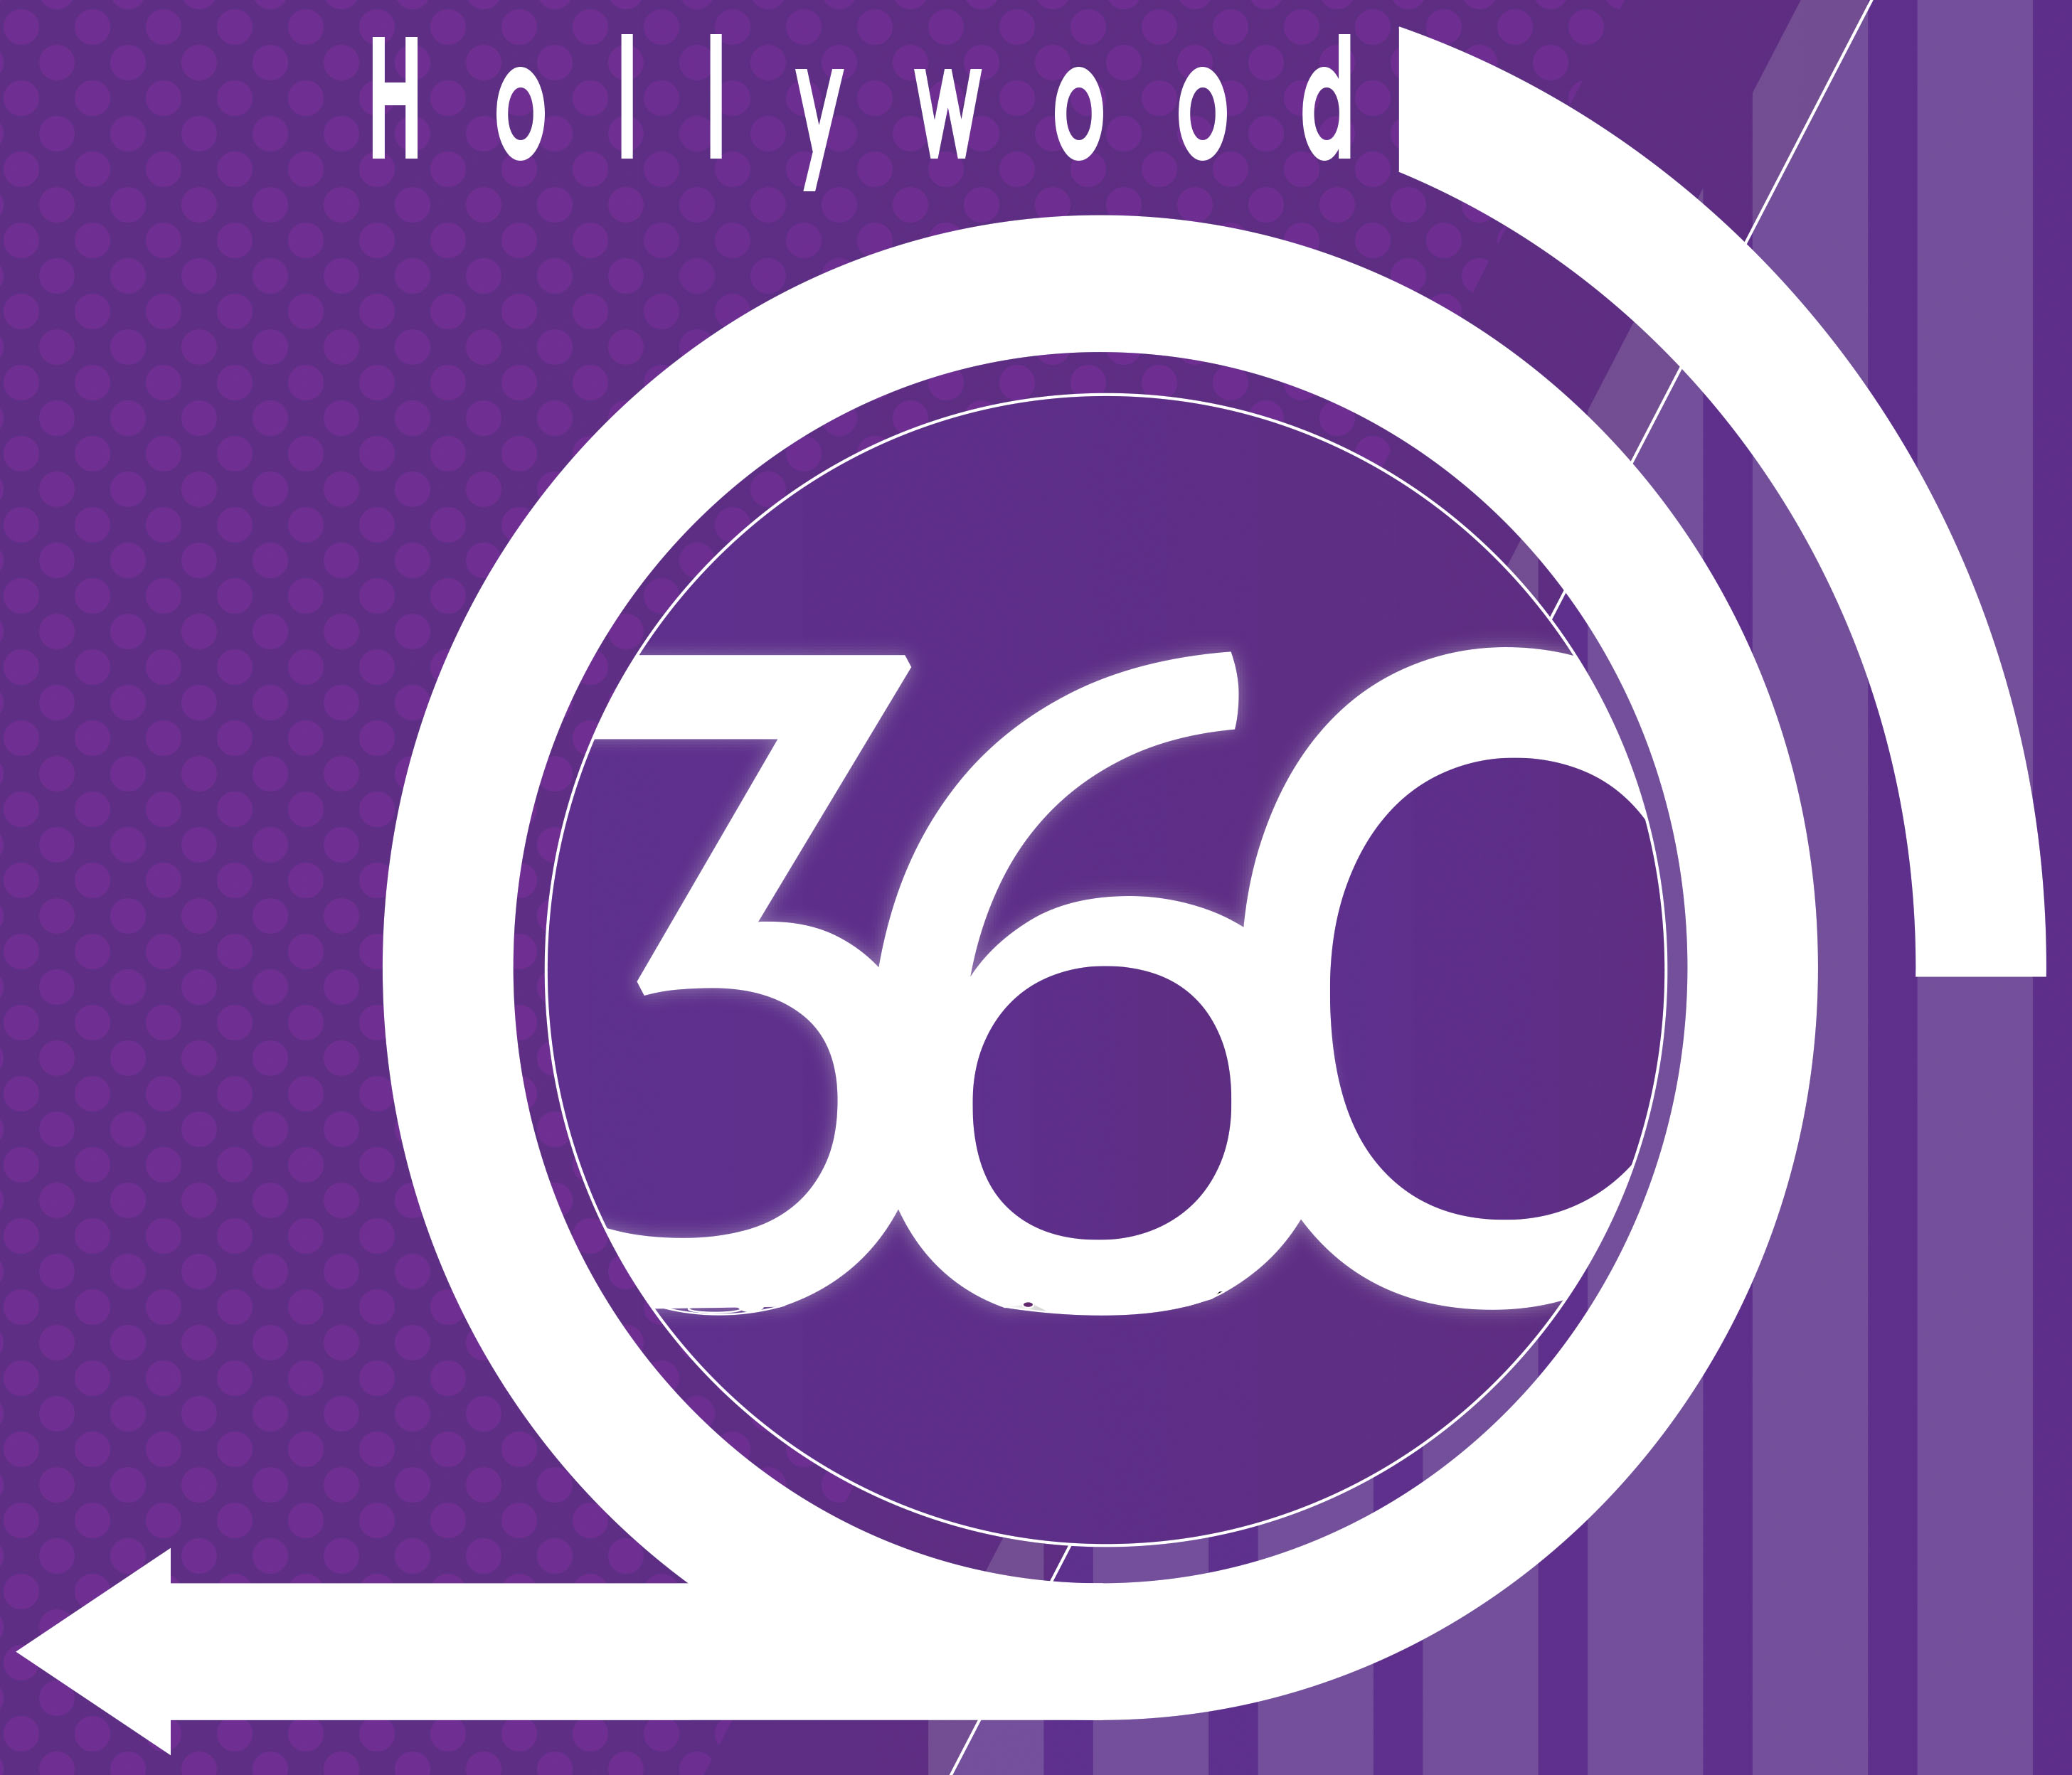 The Hollywood 360